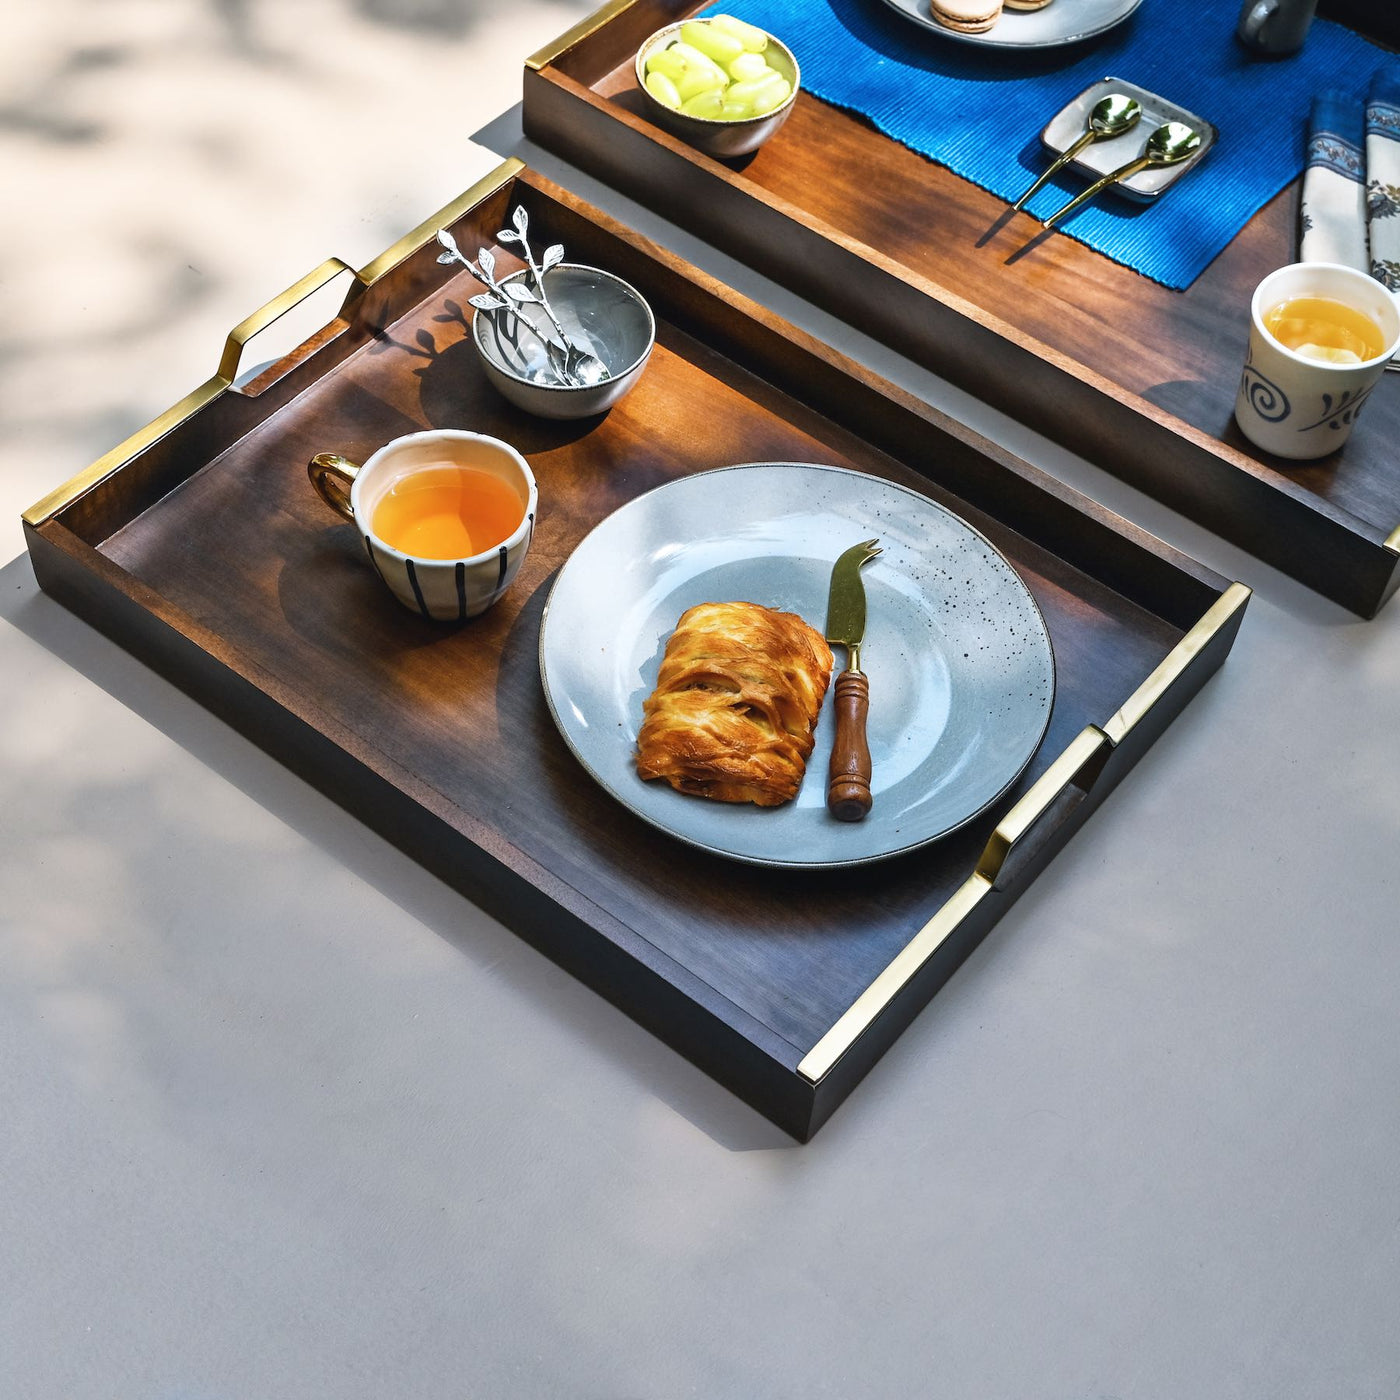 Large Rectangular Wood Tray with Handles